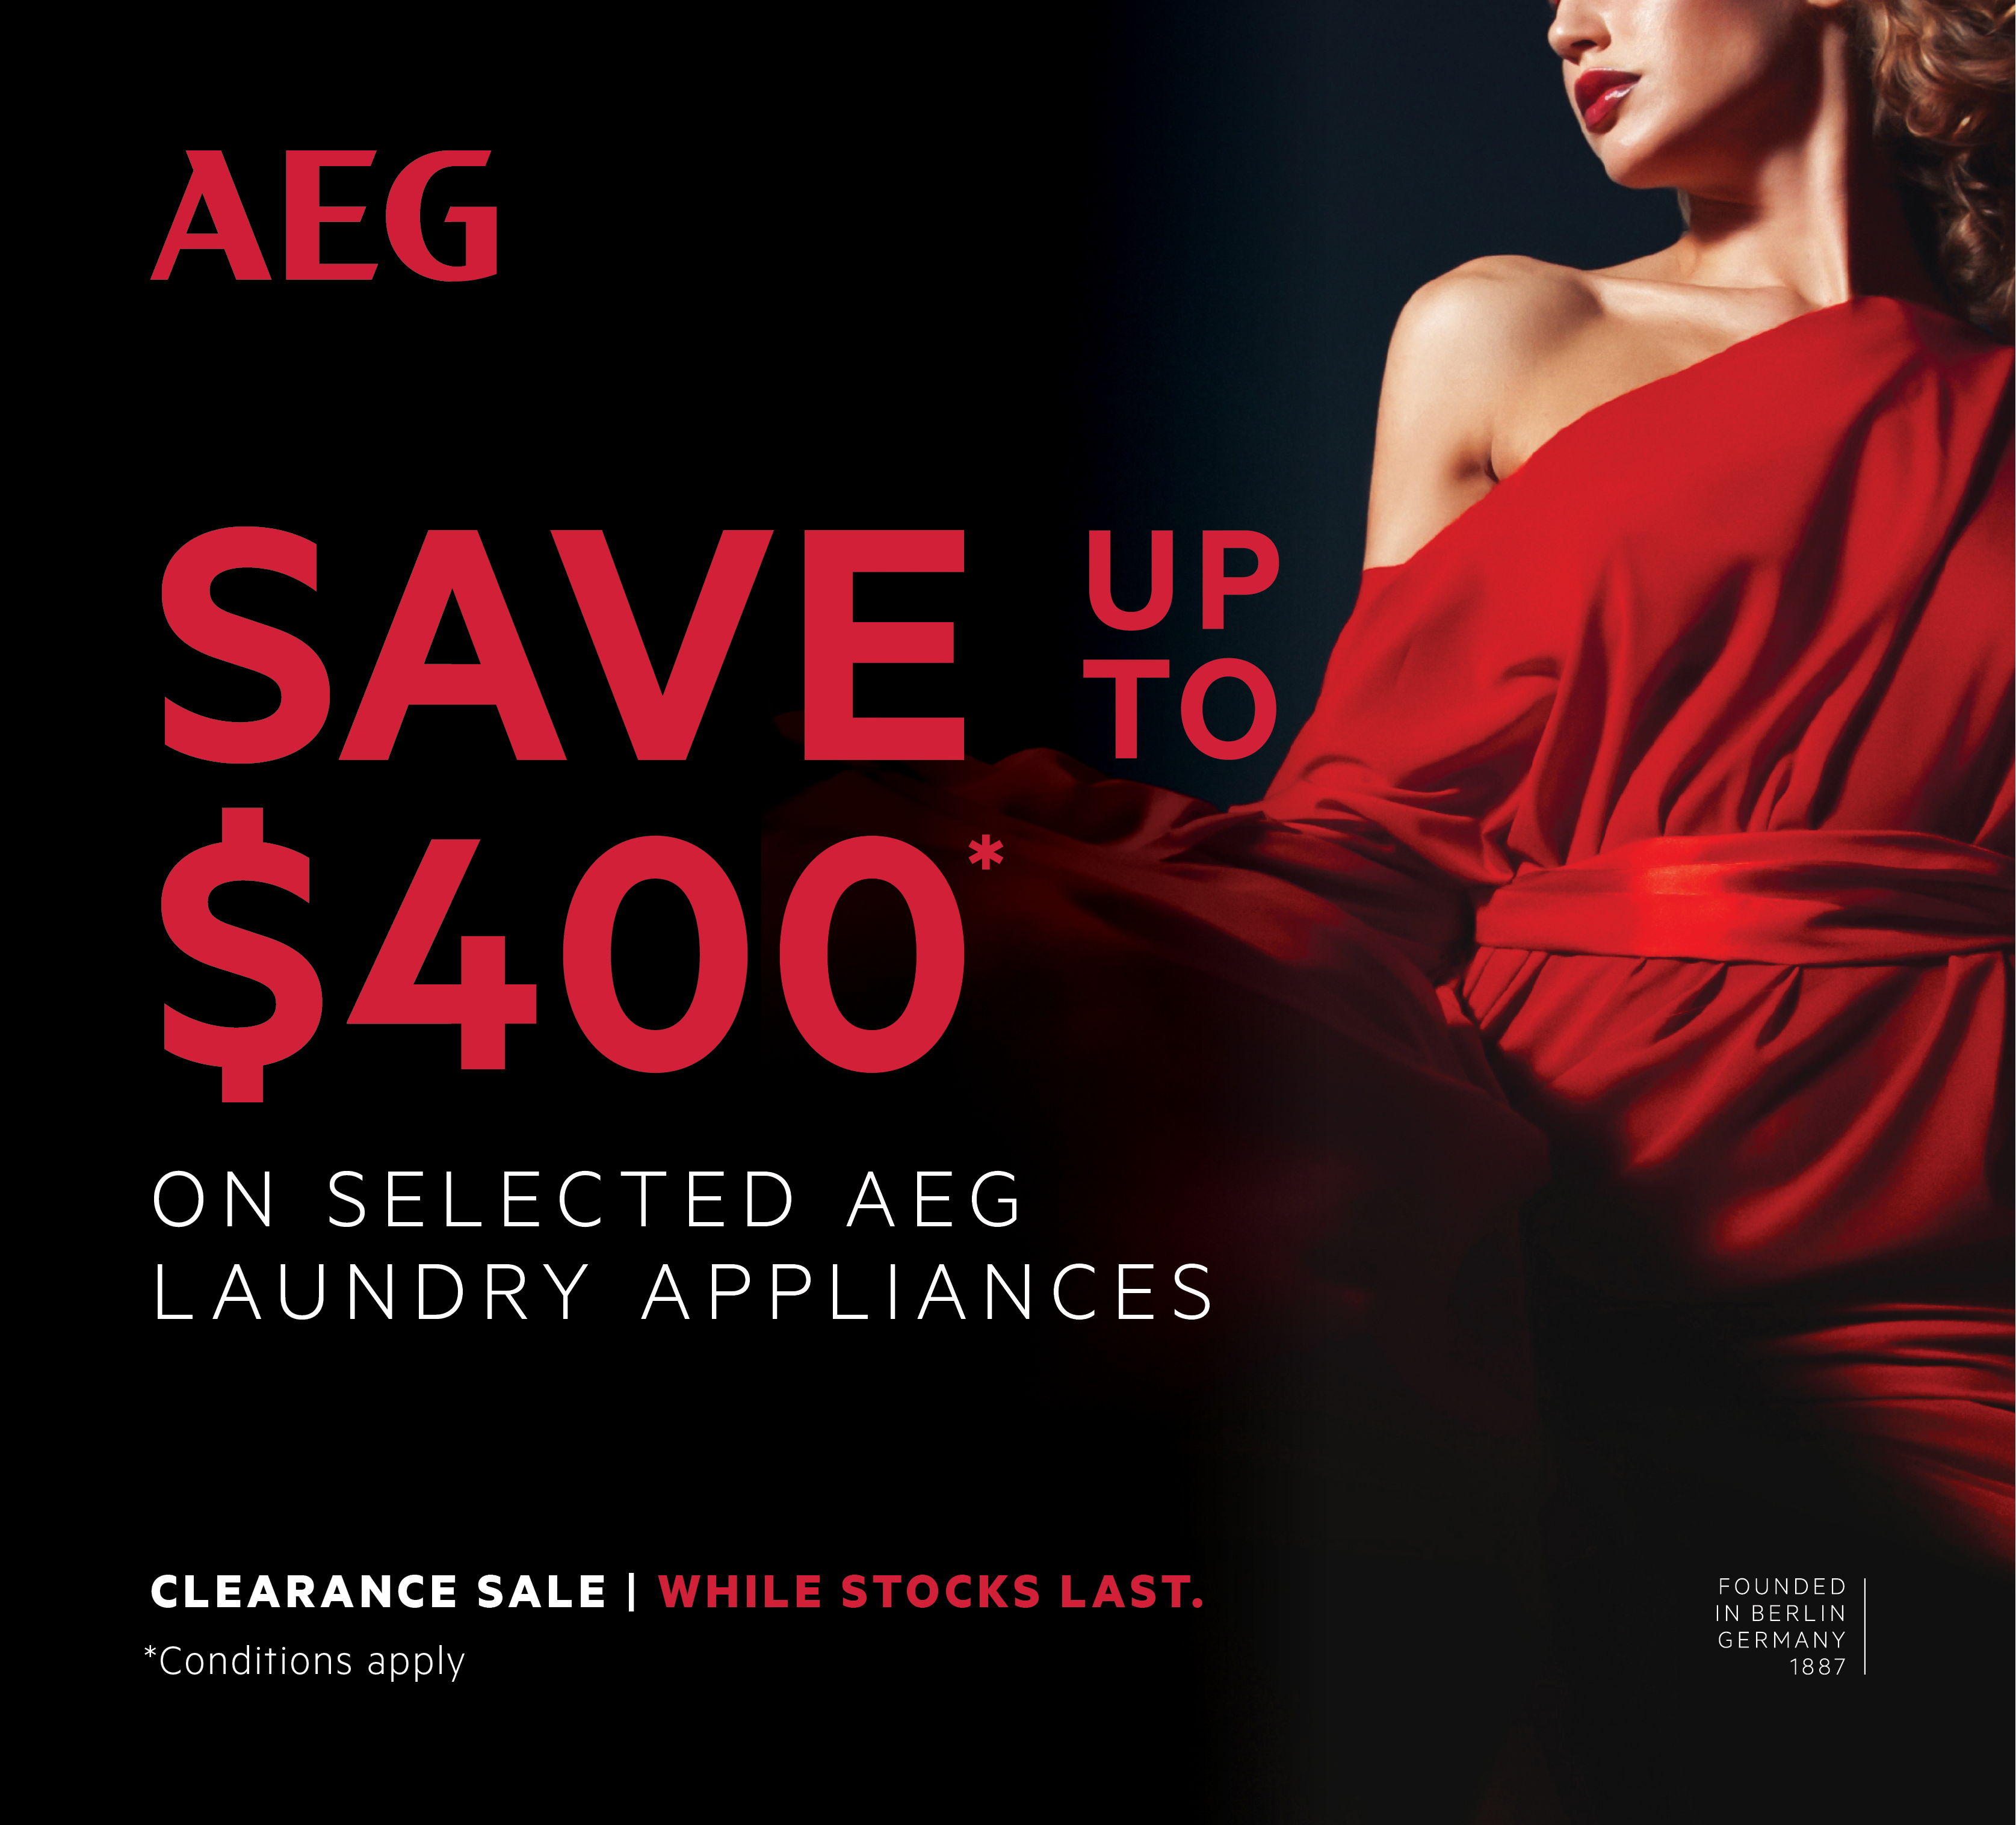 Save up to $400* on Selected AEG Laundry Appliances